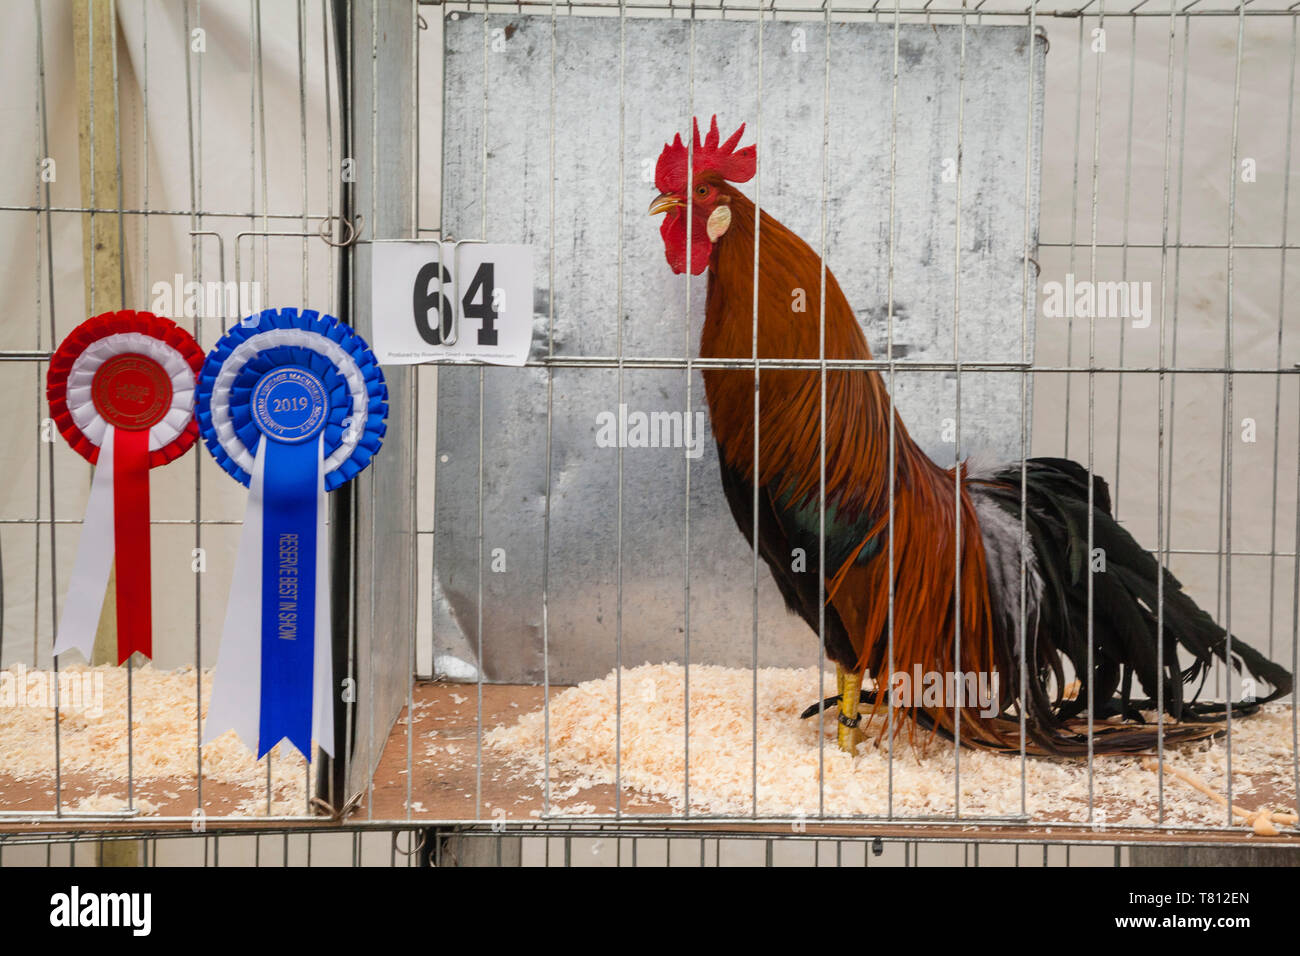 A prizewinning cockerel at a country show, winner of 'Best in Show'. Stock Photo